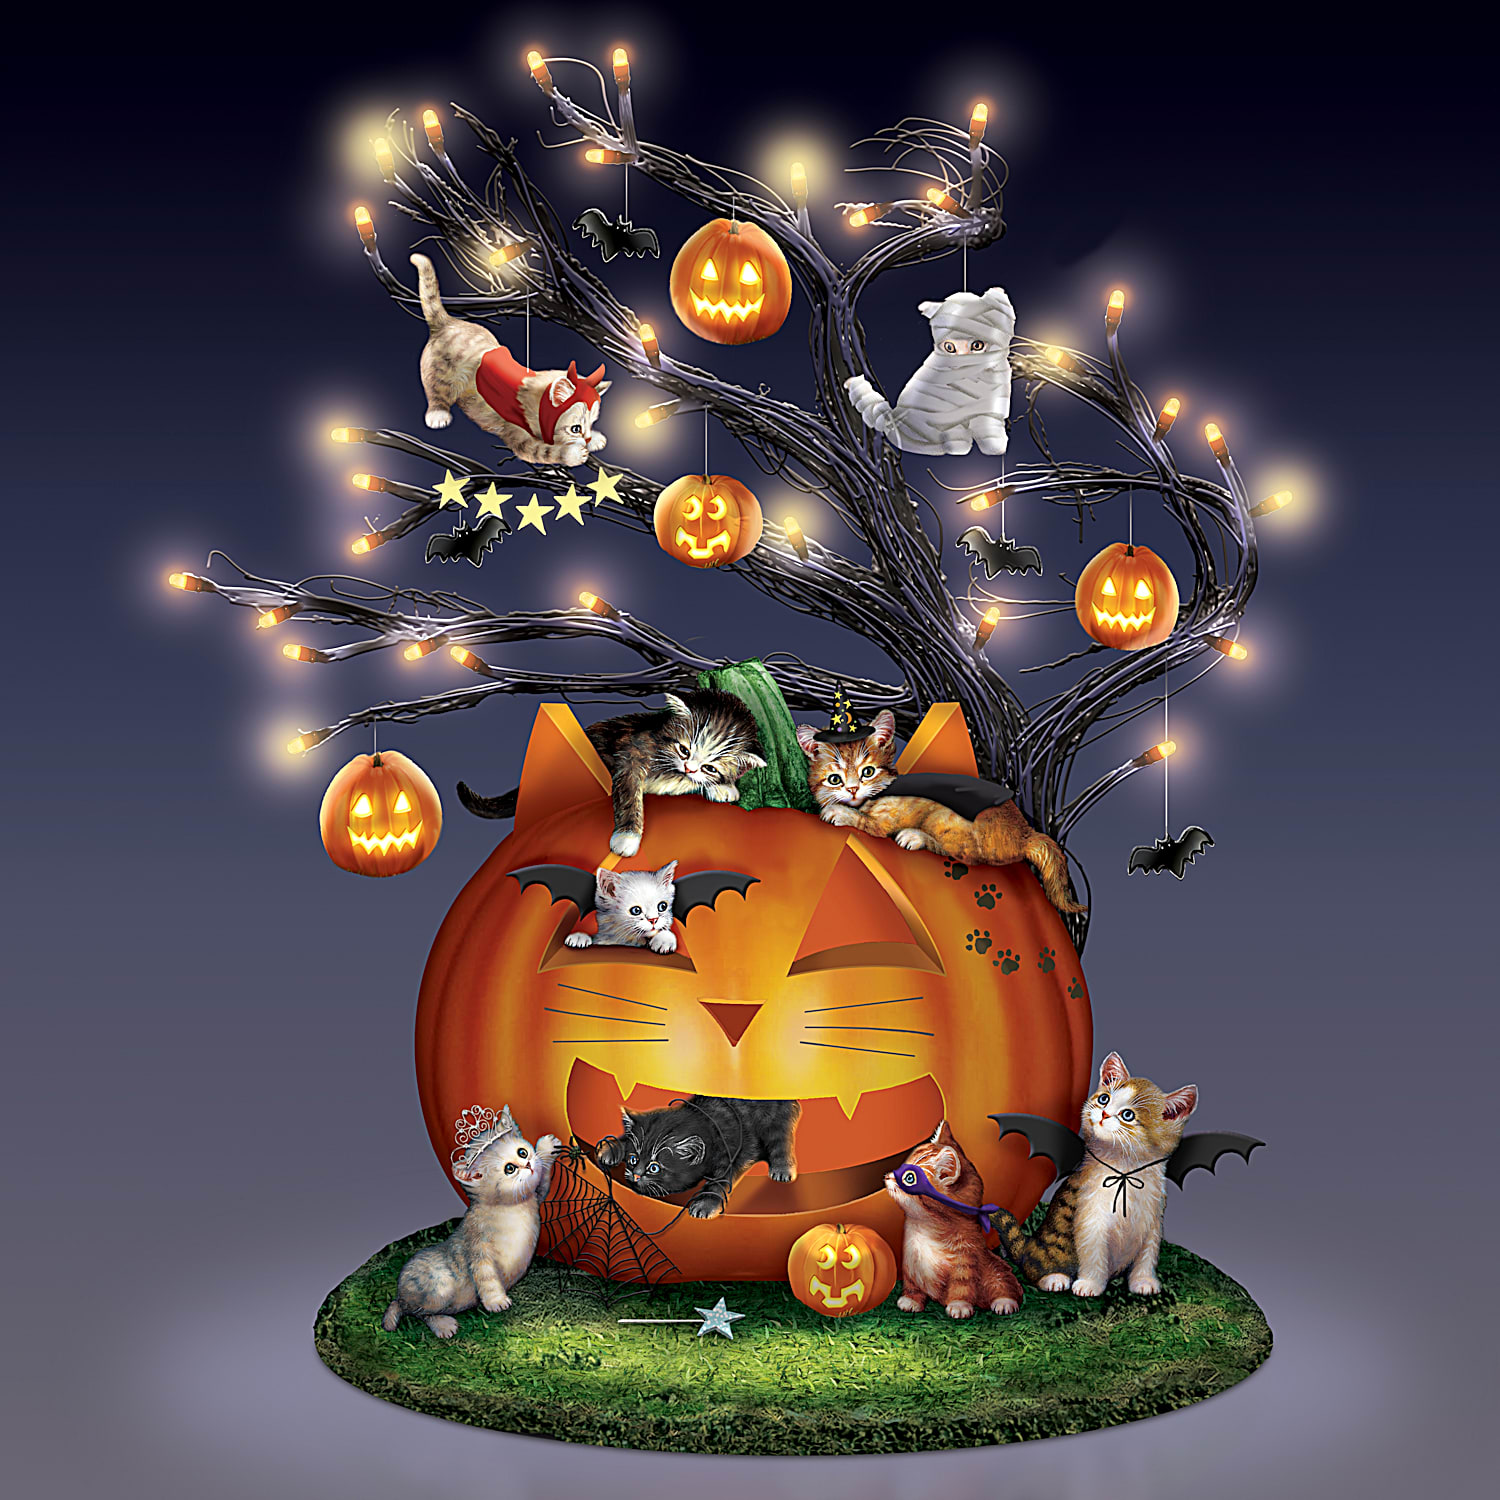 Purr Fectly Mischievous Halloween Illuminated Tabletop Tree Featuring Hand Painted Sculpted Cats Each With A Unique Costume